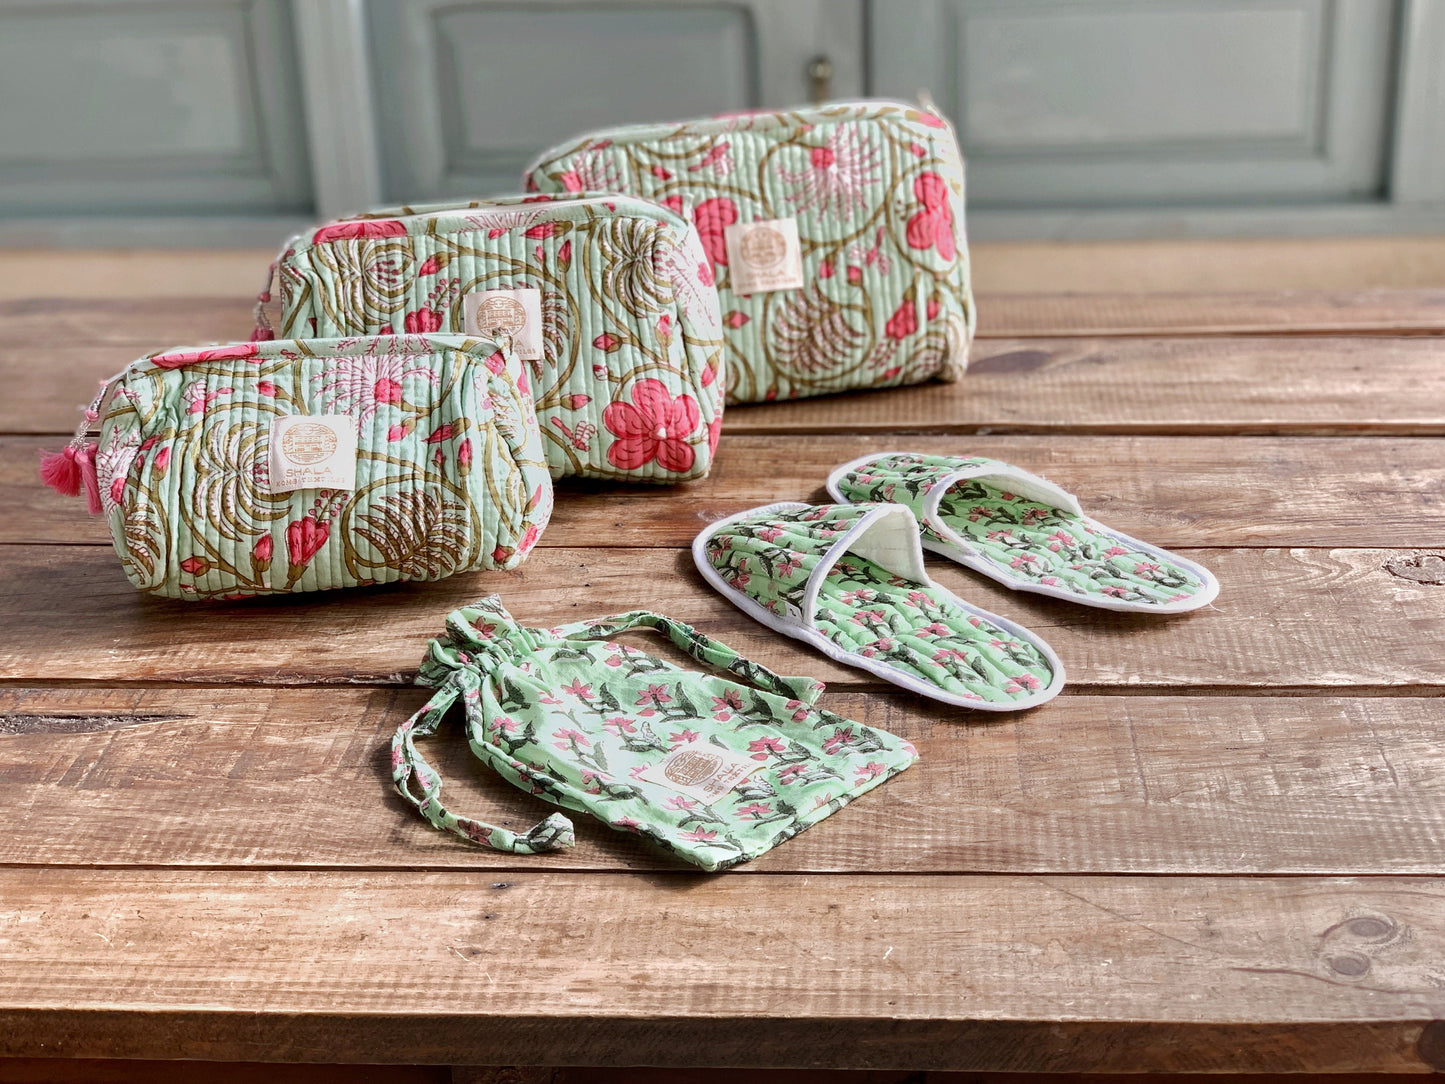 Padded toiletry bag · Pure cotton block print in India · Padded makeup bag, carryall · Green and pink flowers